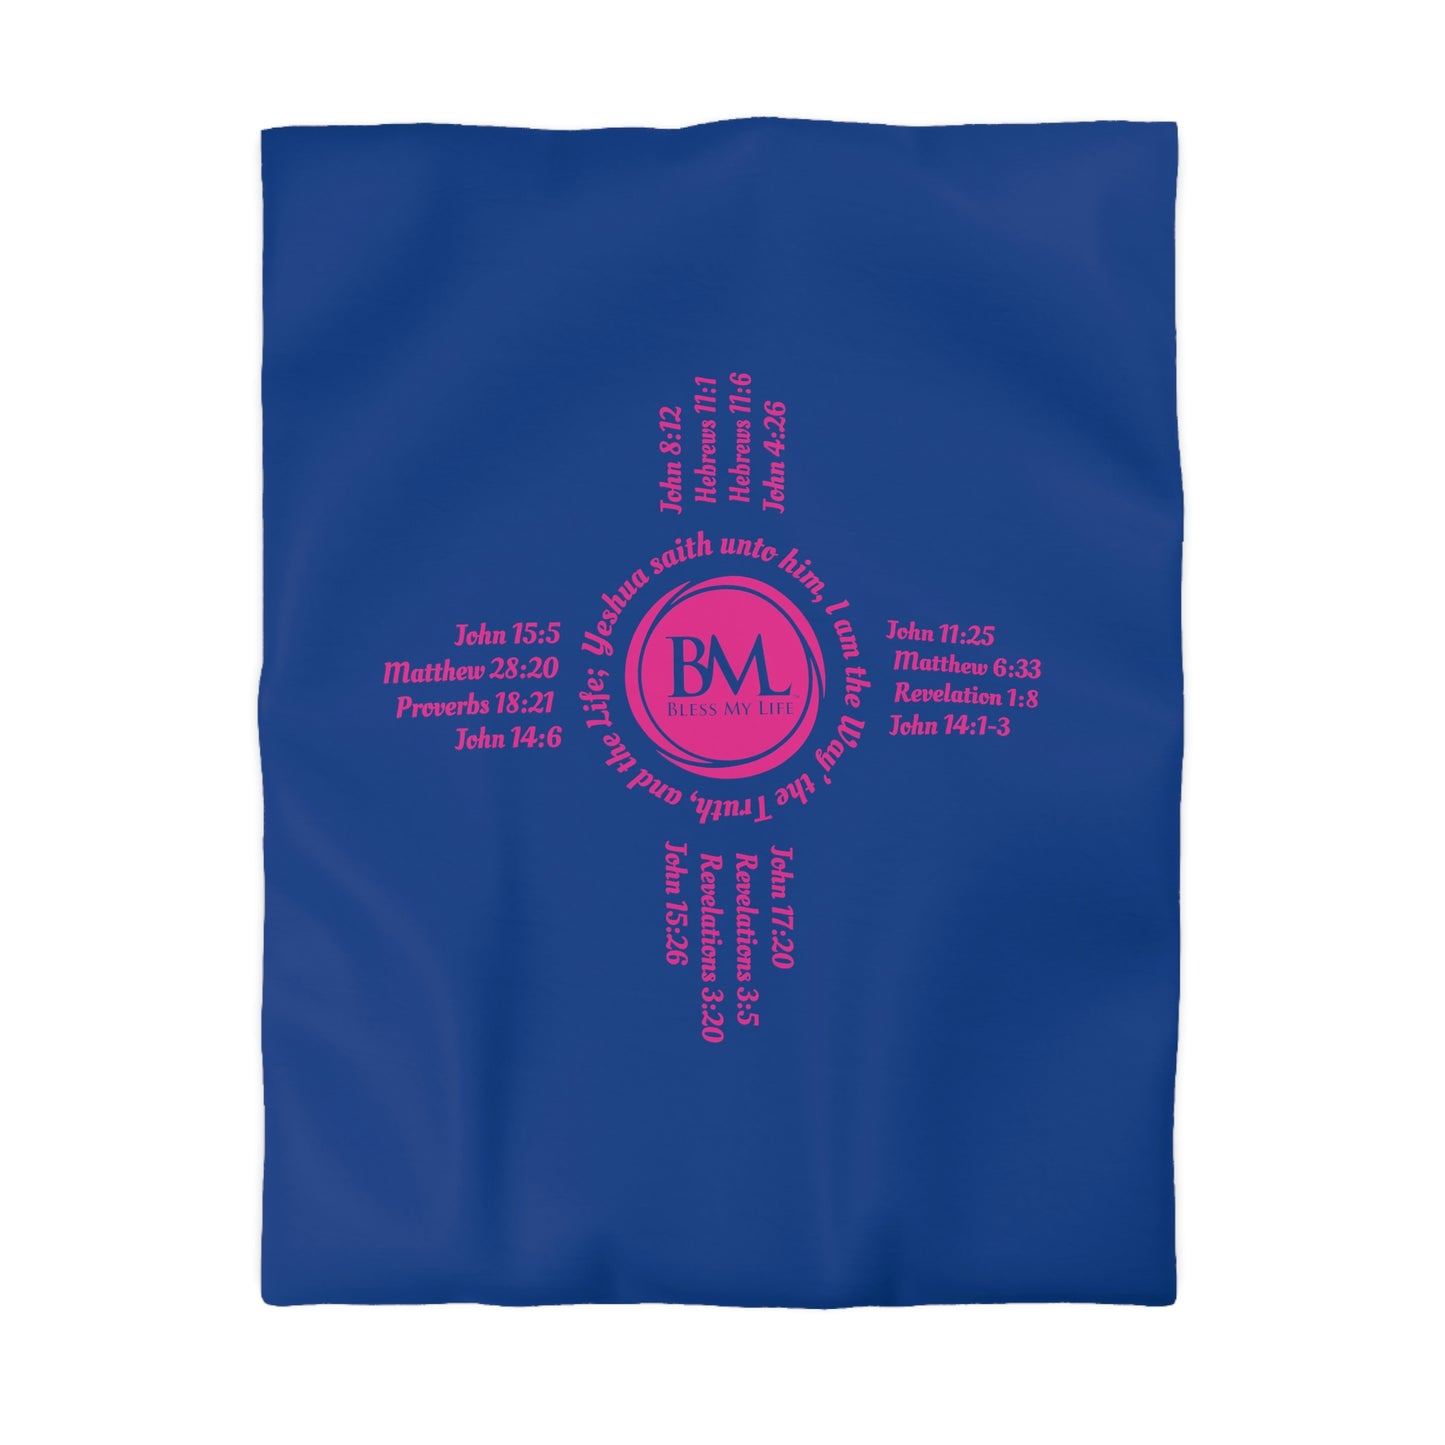 Literally COVER Yourself with Biblical Scriptures with this Zia Symbol Microfiber Duvet Cover, A New Mexico Icon & Favorite! Blue Cover with Pink Zia!